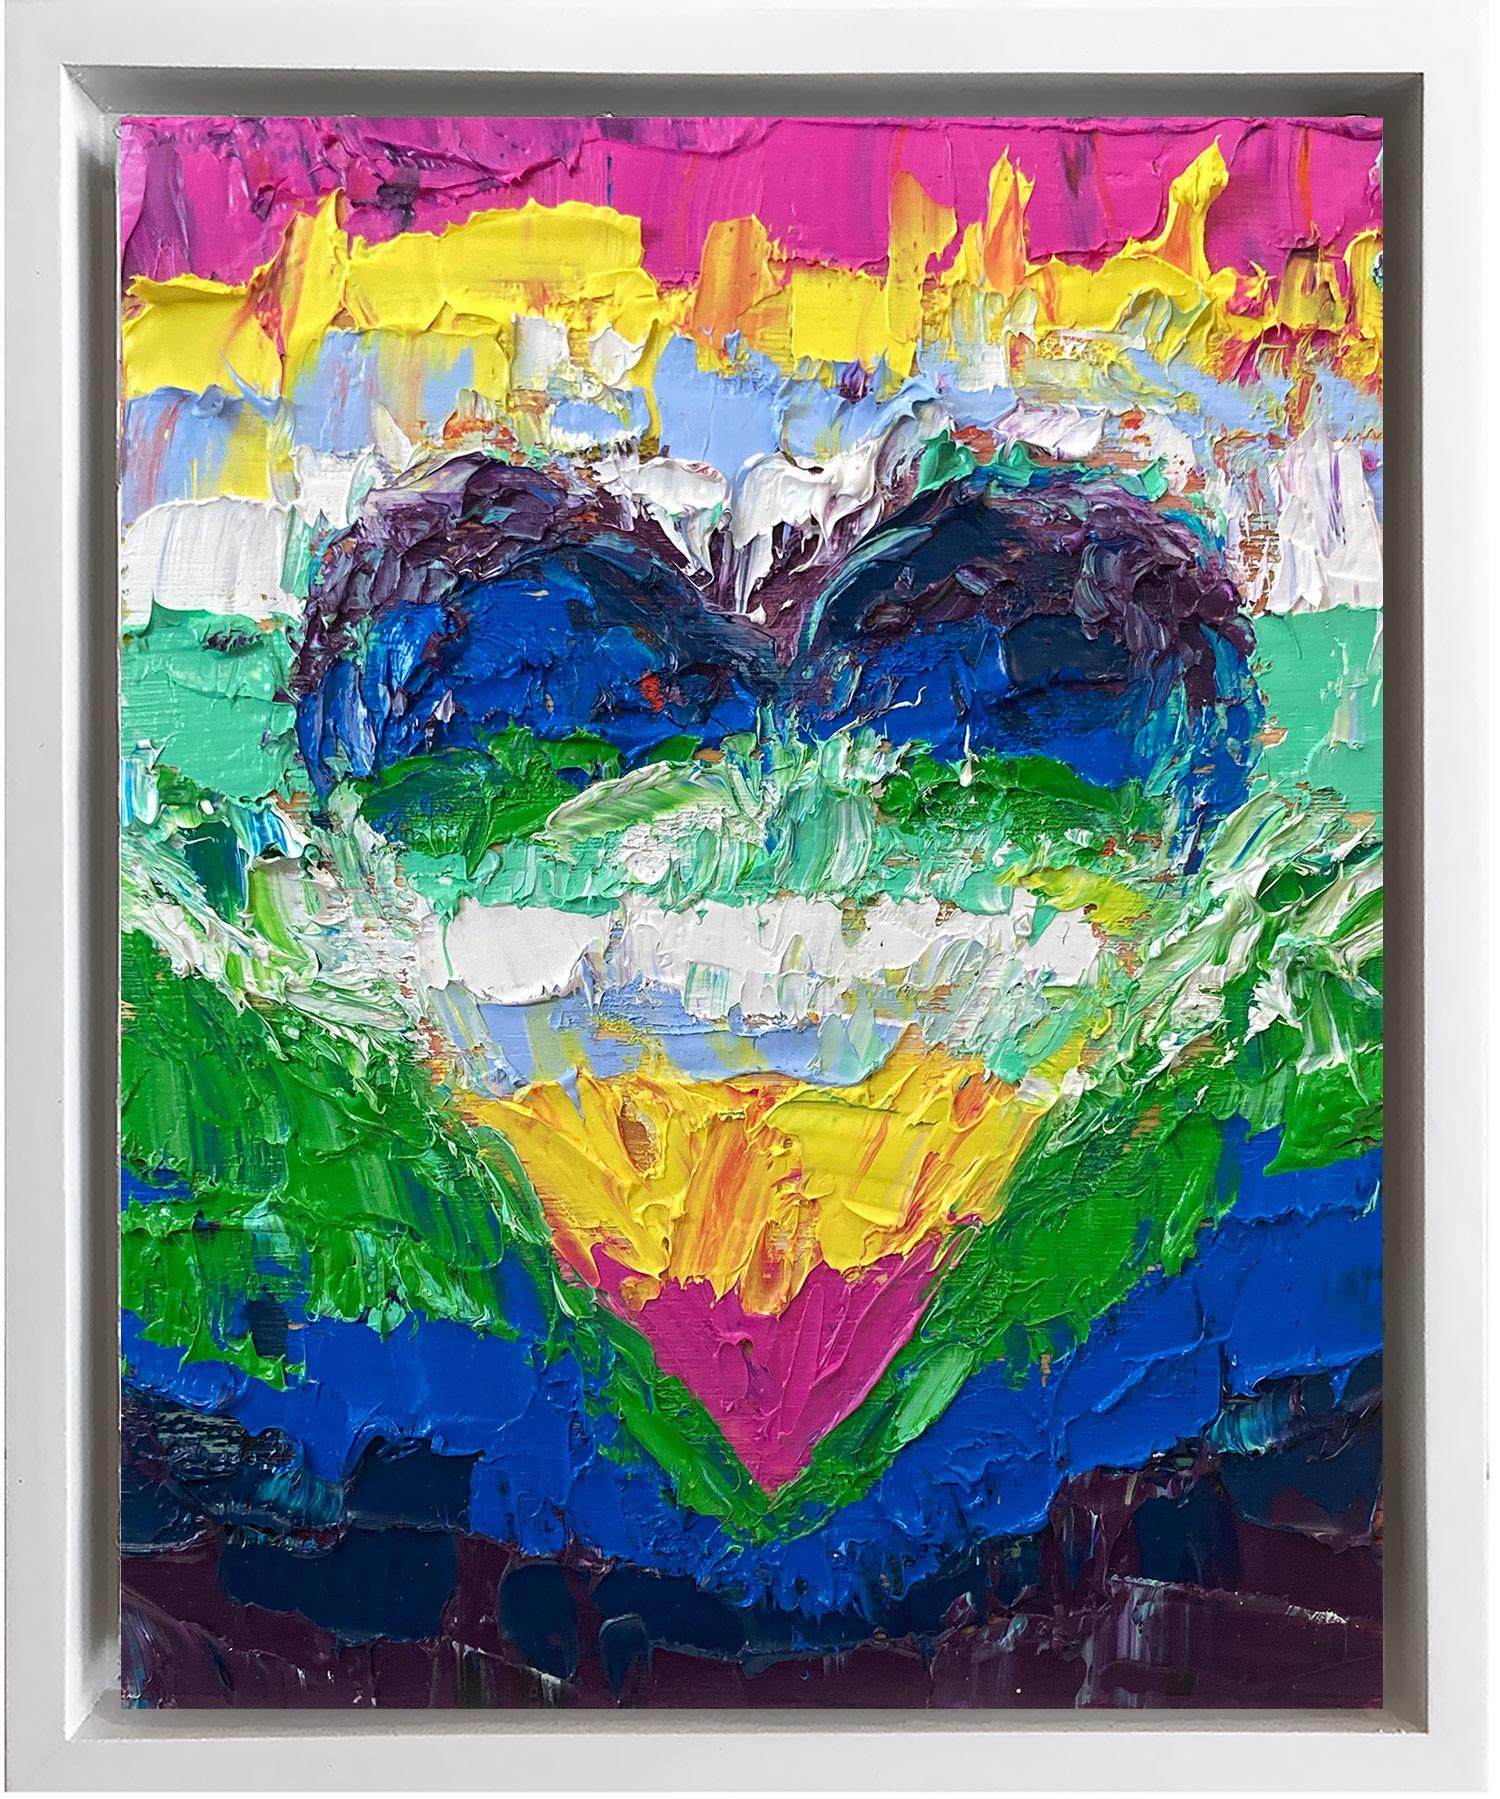 Cindy Shaoul Figurative Painting - "My Aquarius Heart" Colorful Pop Art Oil Painting with White Floater Frame